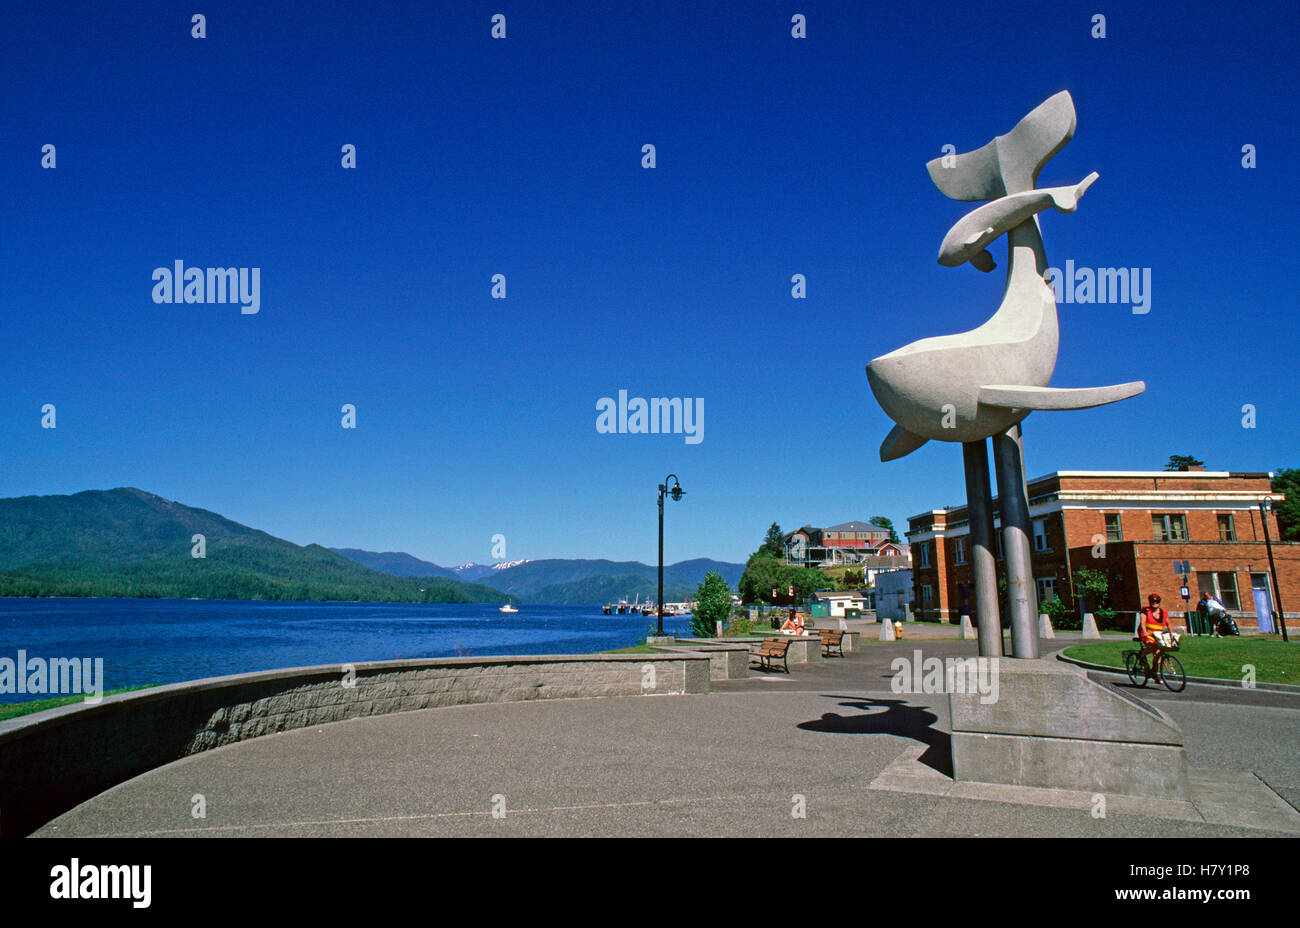 Sculpture of whale with cub at the promenade of Prince Rupert, British Columbia, Canada Stock Photo